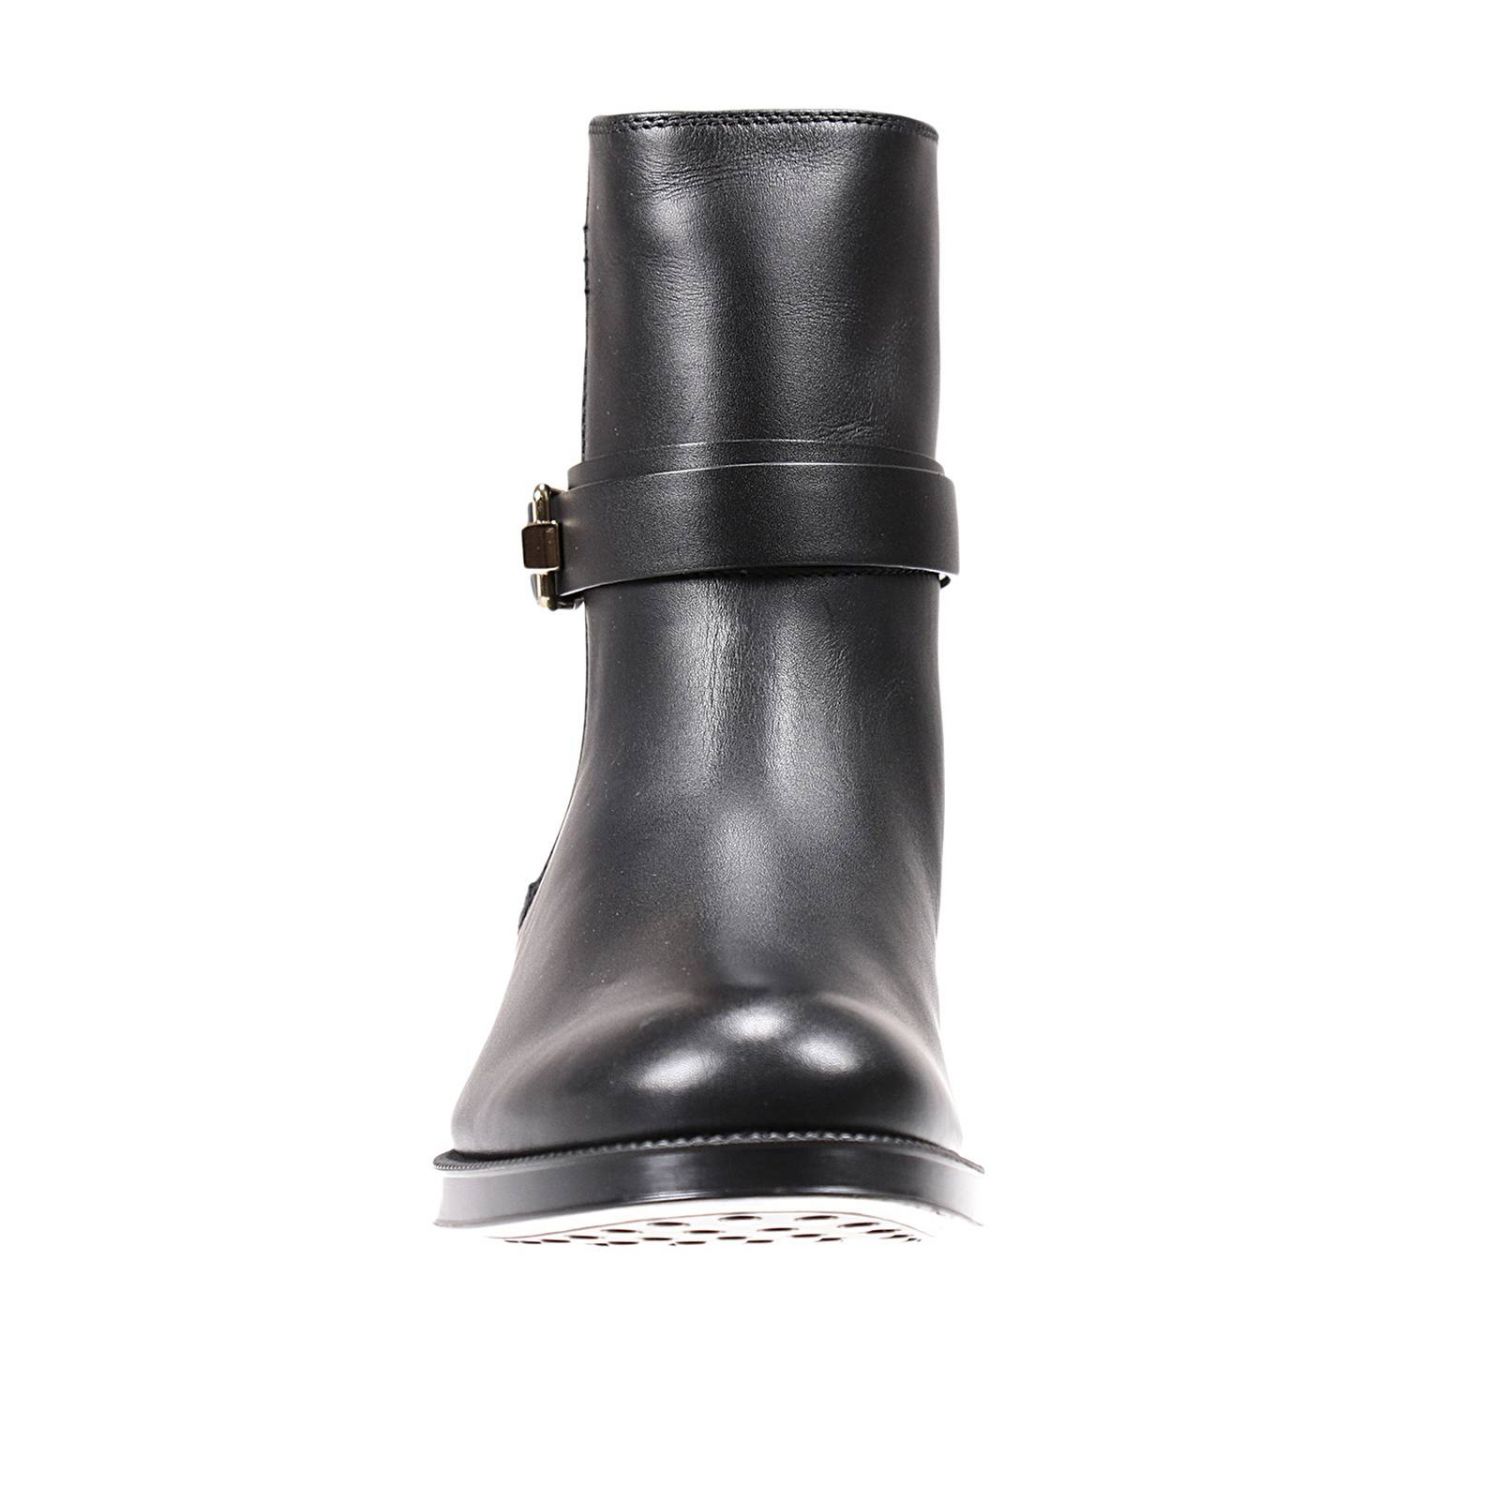 Tods Outlet: | Boots Tods Women Black | Boots Tods xxw0wv0o140 br0 ...